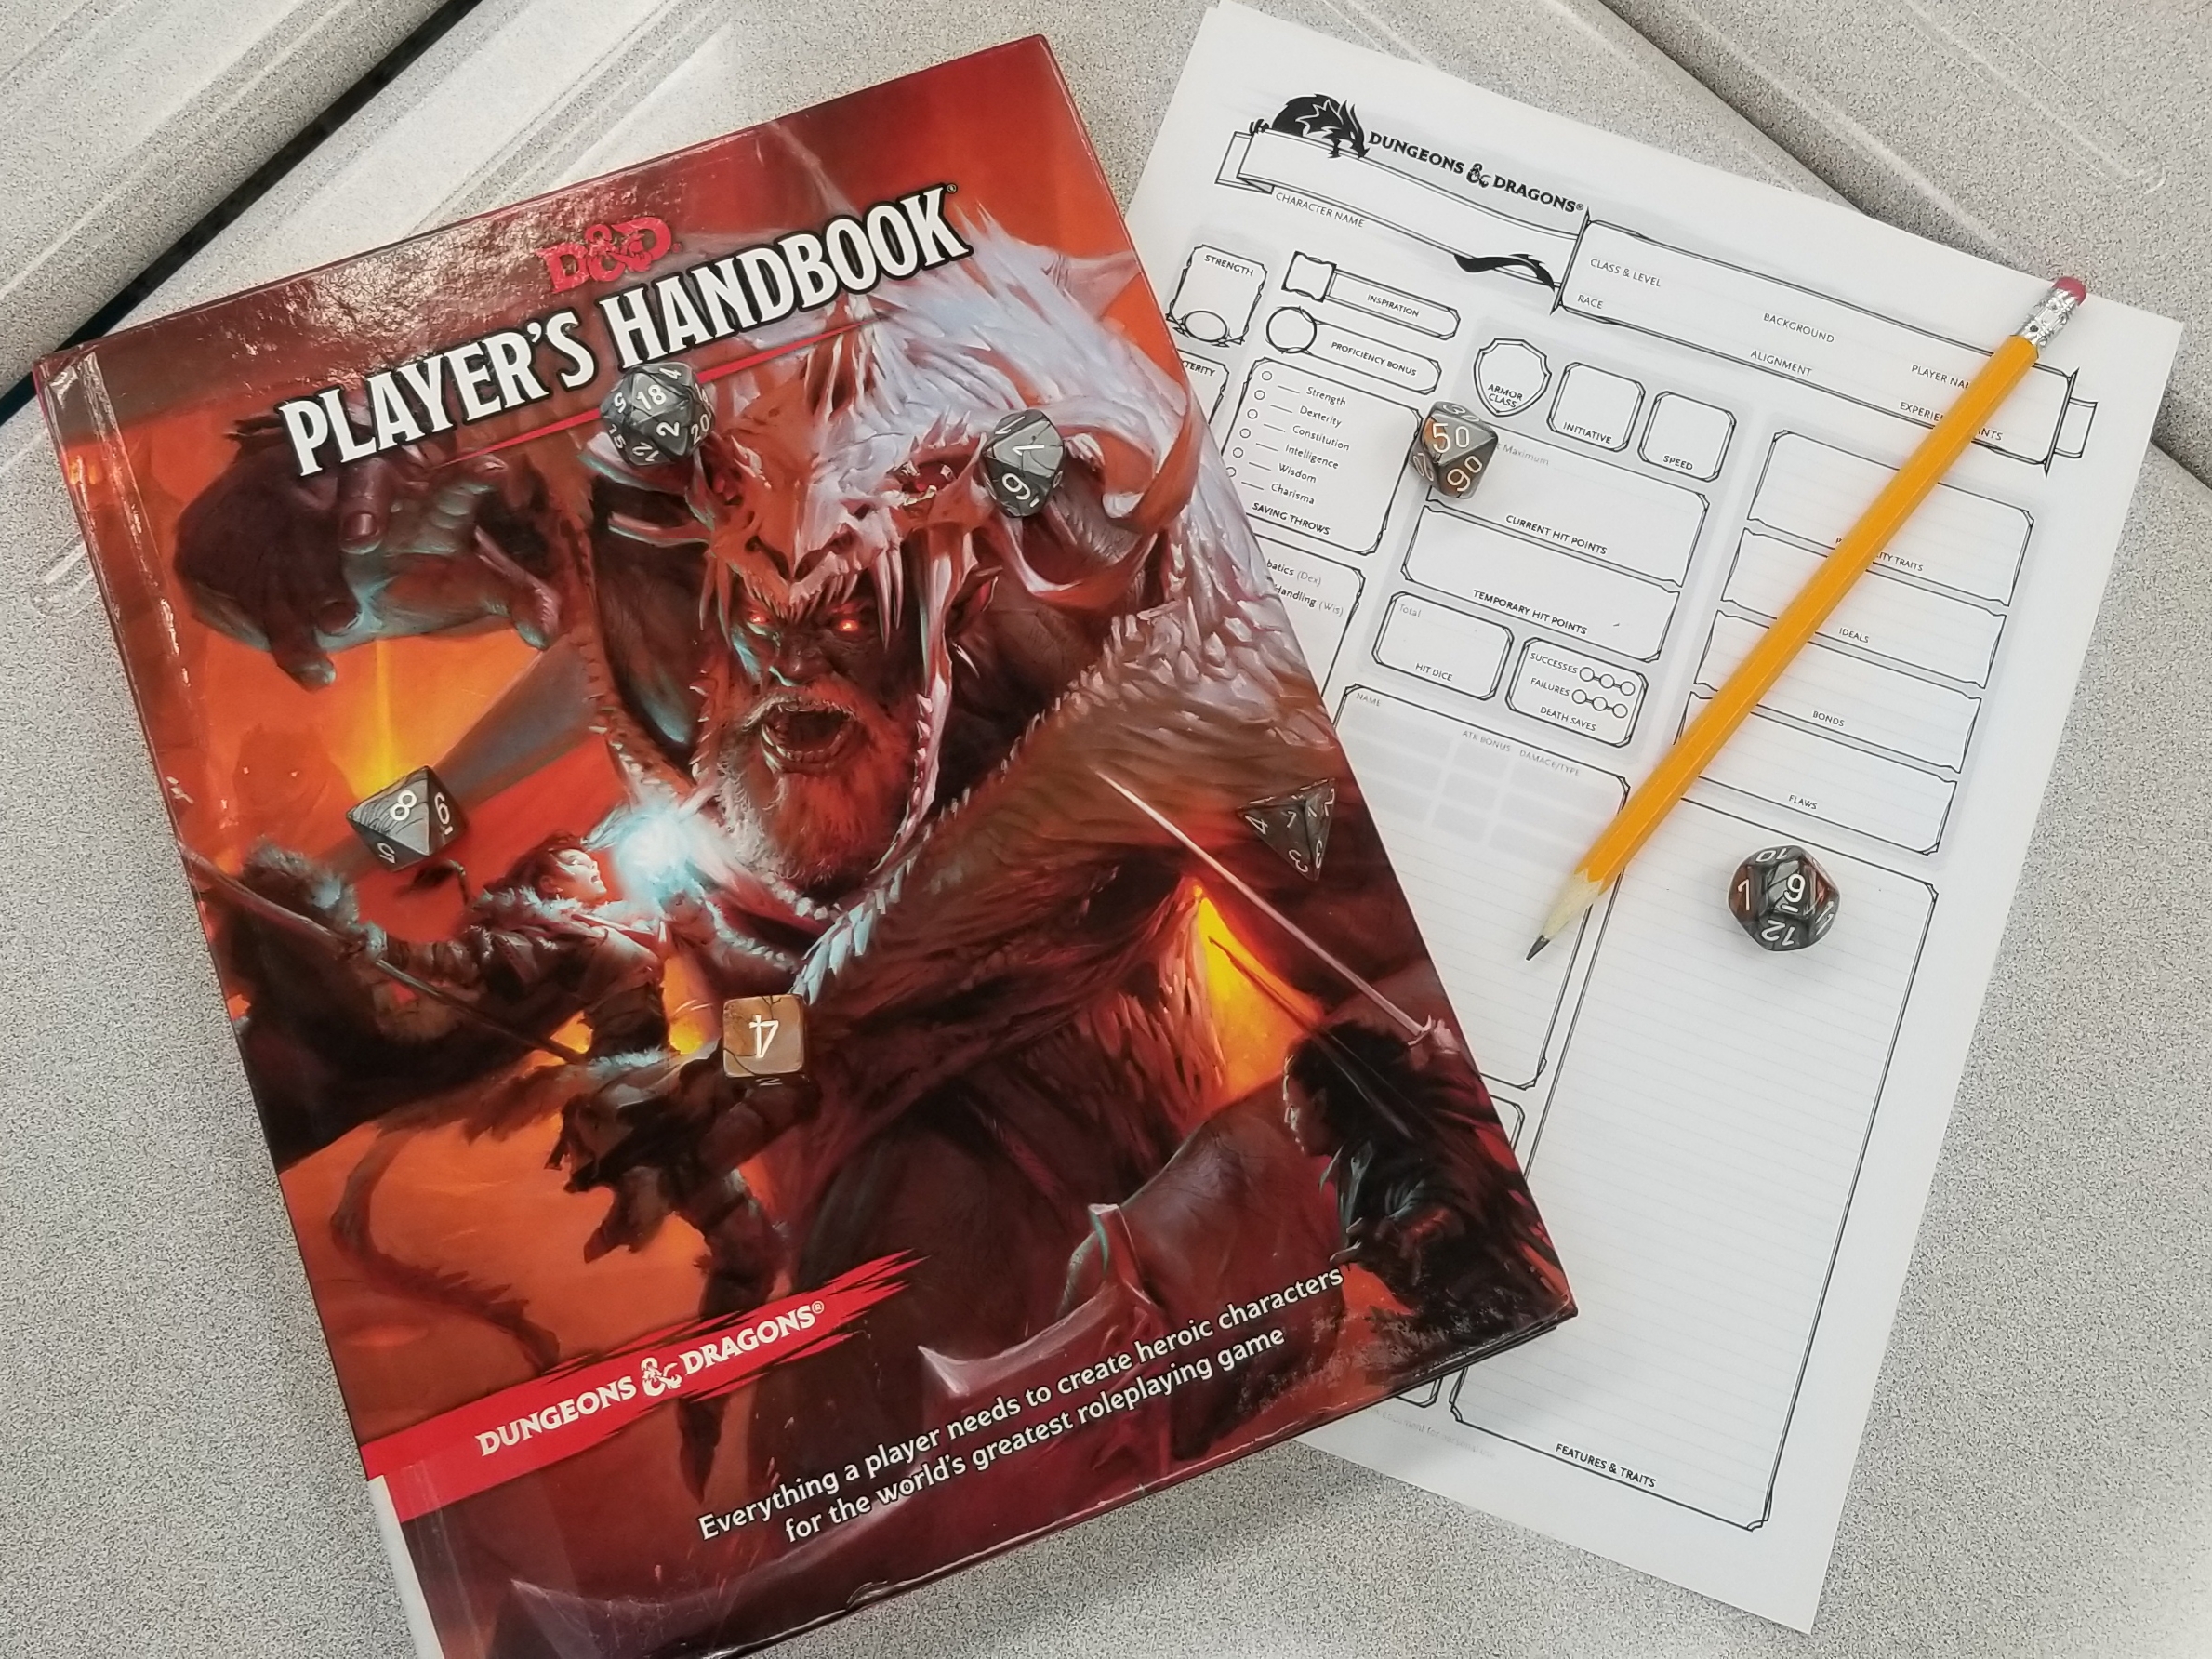 D&D Player's Handbook with Dice and a blank Character sheet